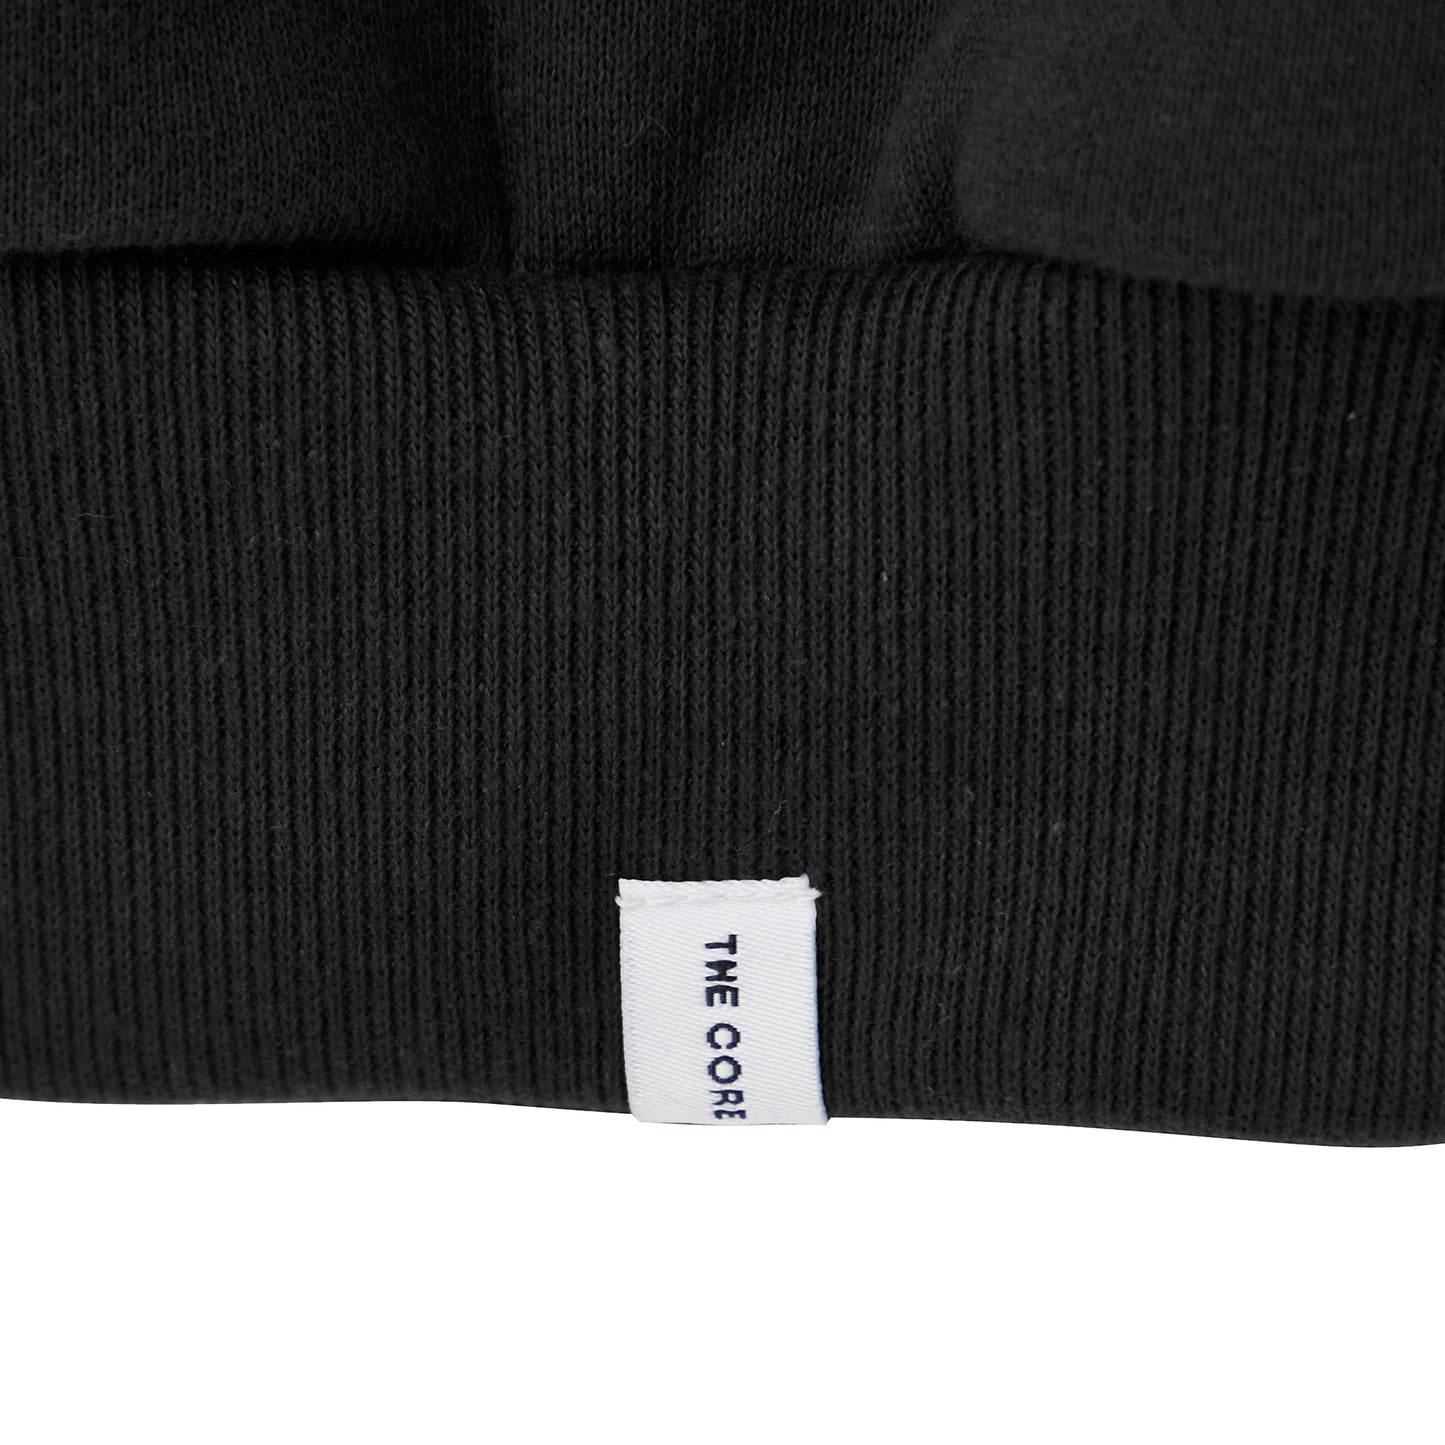 THE CORE IDEAL HOODIE